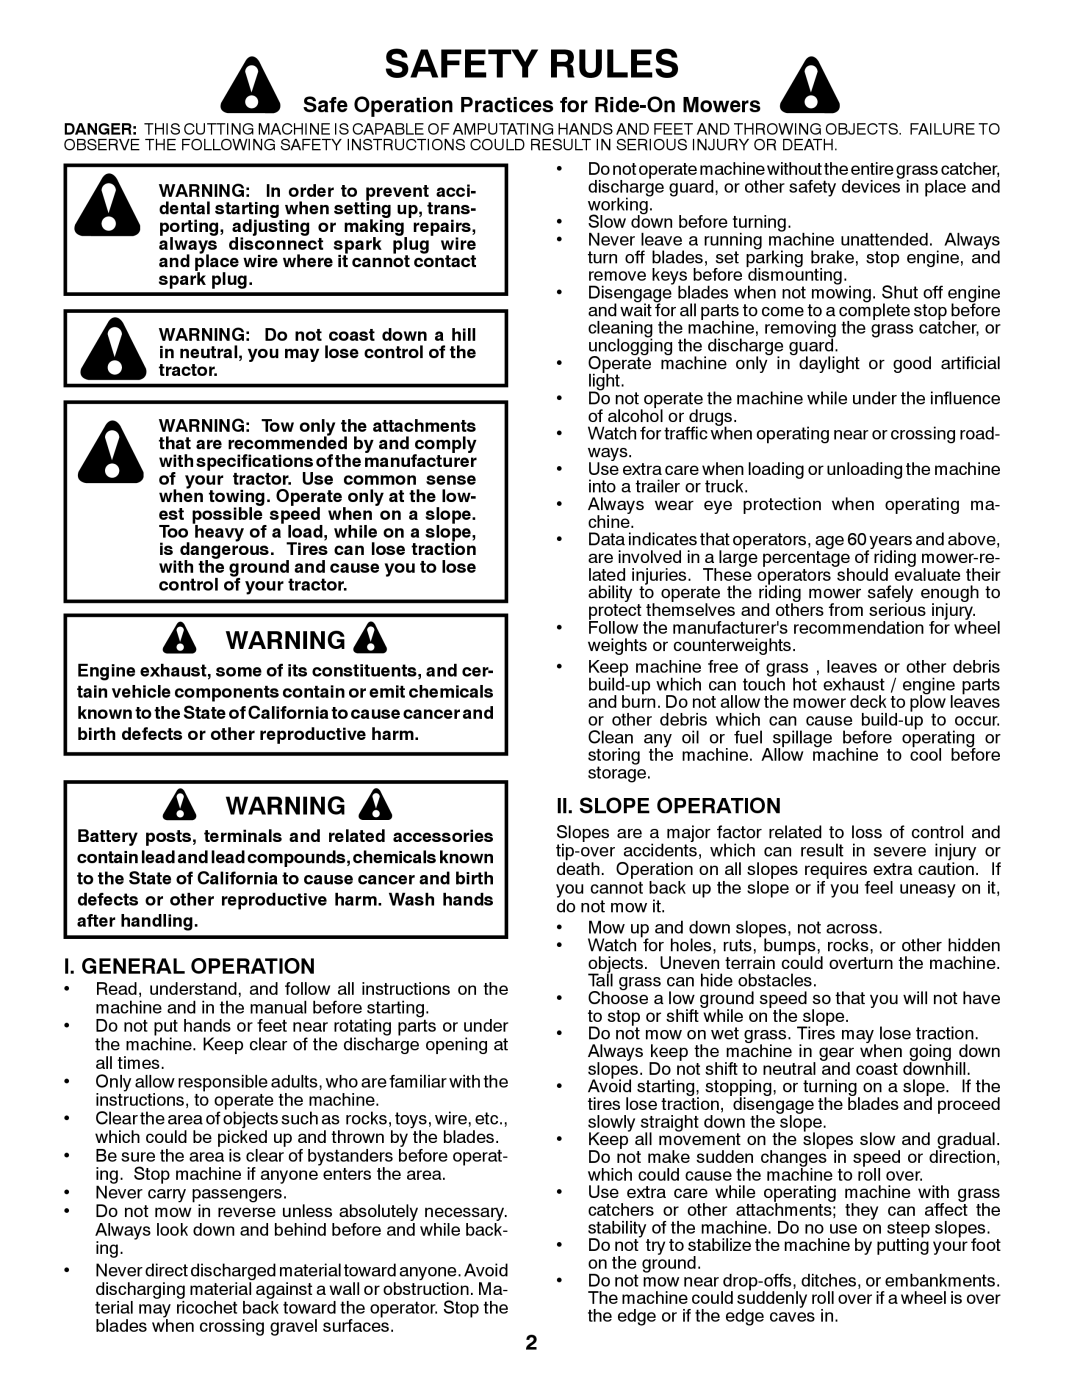 Poulan 431535 manual Safety Rules, Safe Operation Practices for Ride-On Mowers, I. General Operation, Ii. Slope Operation 